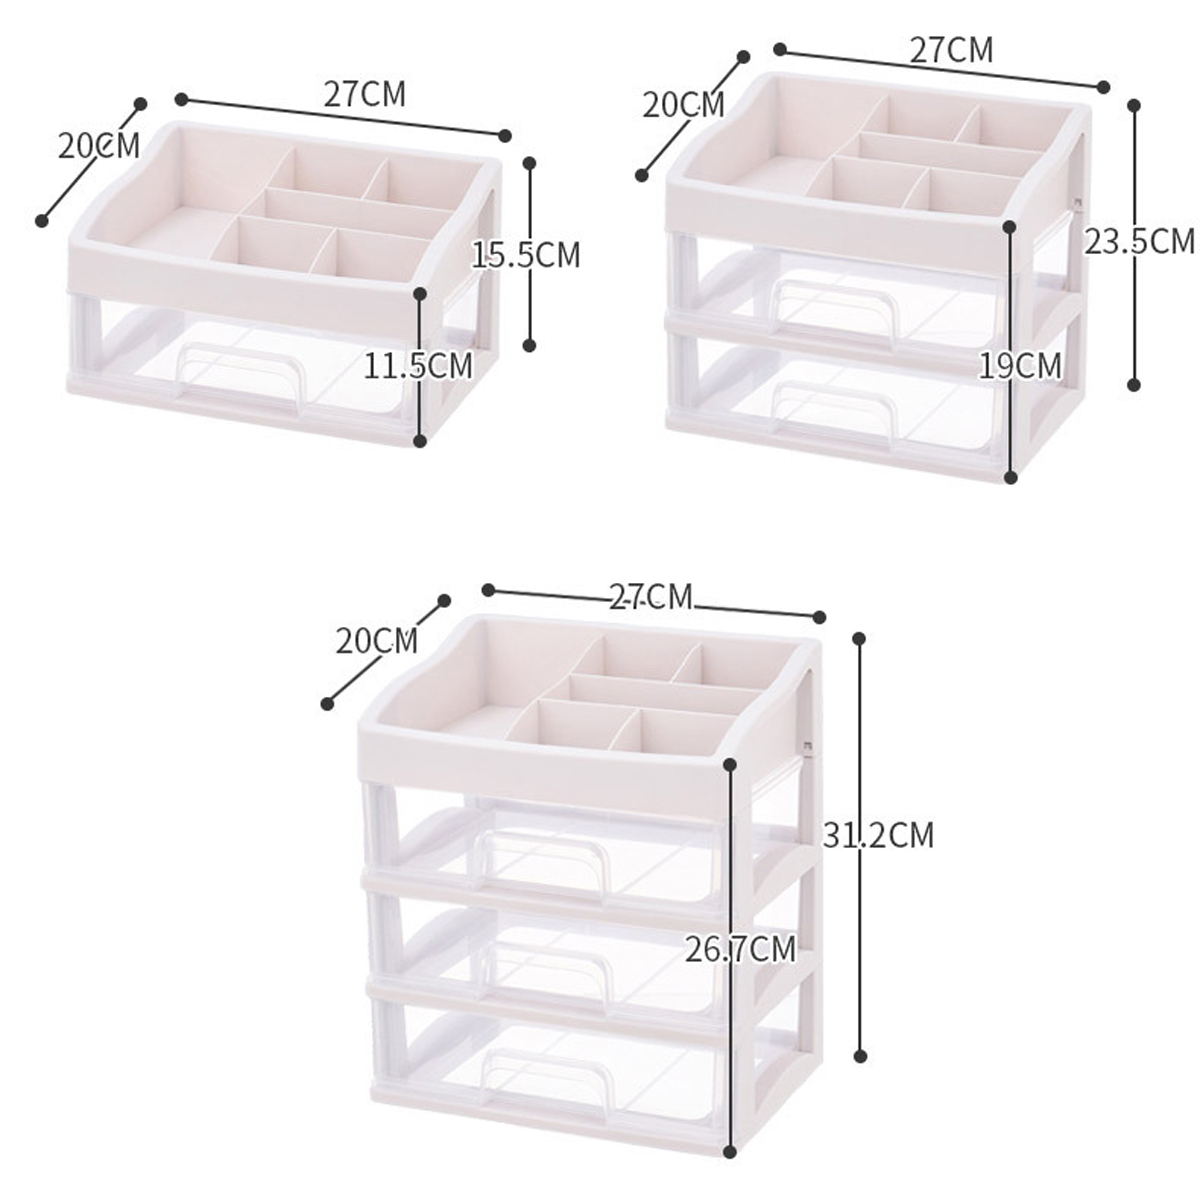 Plastic-Makeup-Holder-Box-Storage-Desktop-Container-Cosmetic--Jewelry-Container-Table-Organizer-1563970-2